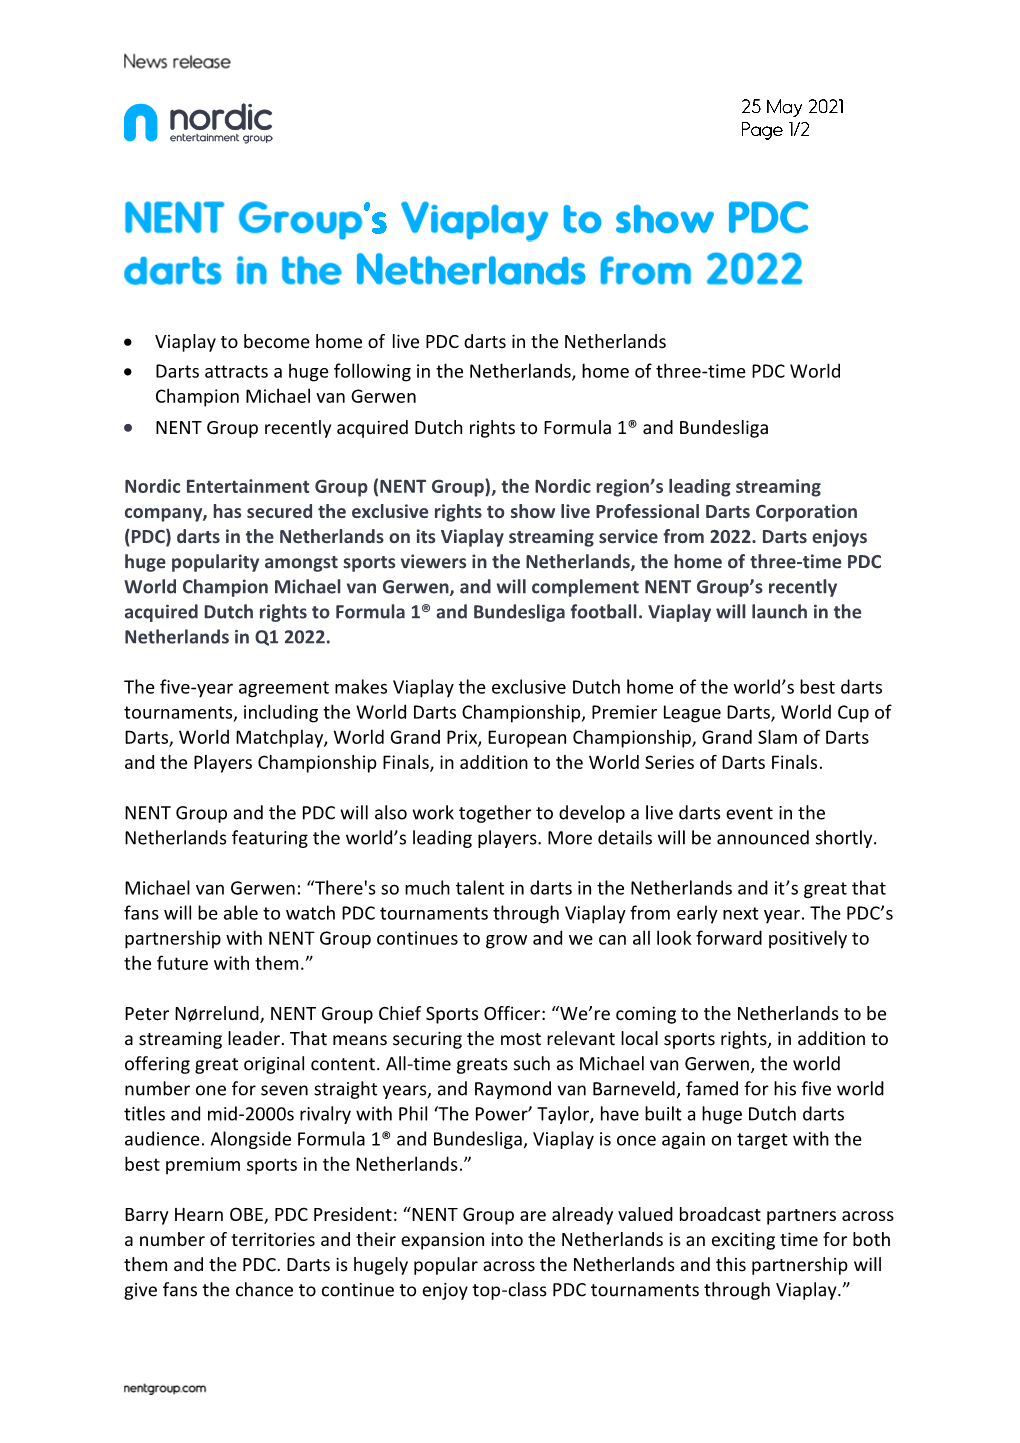 Viaplay to Become Home of Live PDC Darts in the Netherlands • Darts Attracts a Huge Following in the Netherlands, Home Of